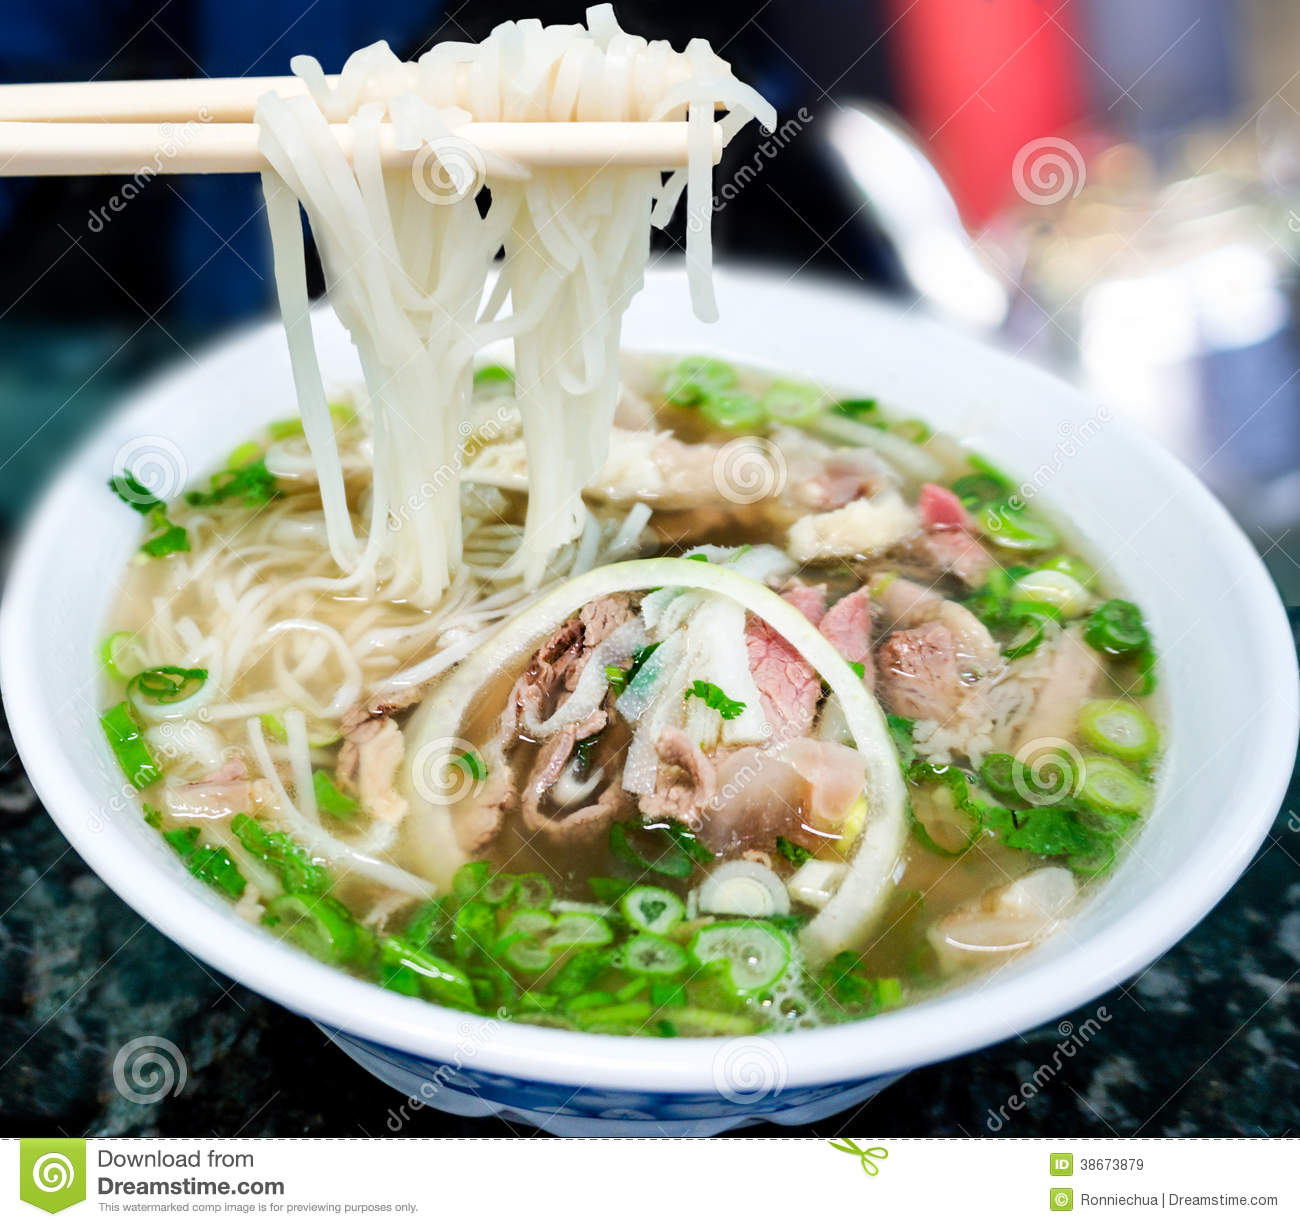 Traditional Vietnamese Pho Beef Noodle Soup Royalty Free Stock Images